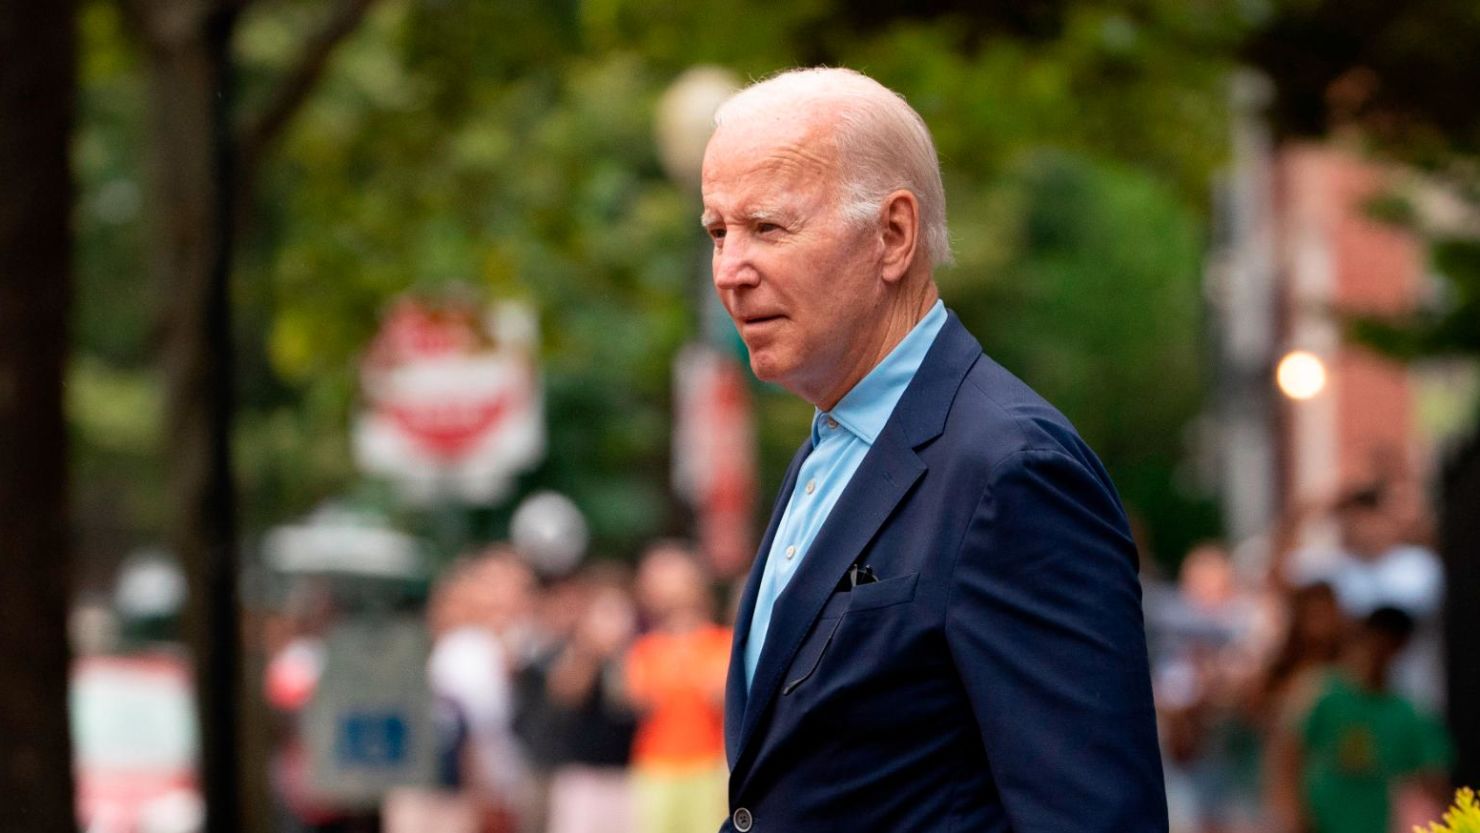 President Joe Biden departs Holy Trinity Catholic Church in the Georgetown section of Washington after attending a Mass in Washington on July 17, 2022. 